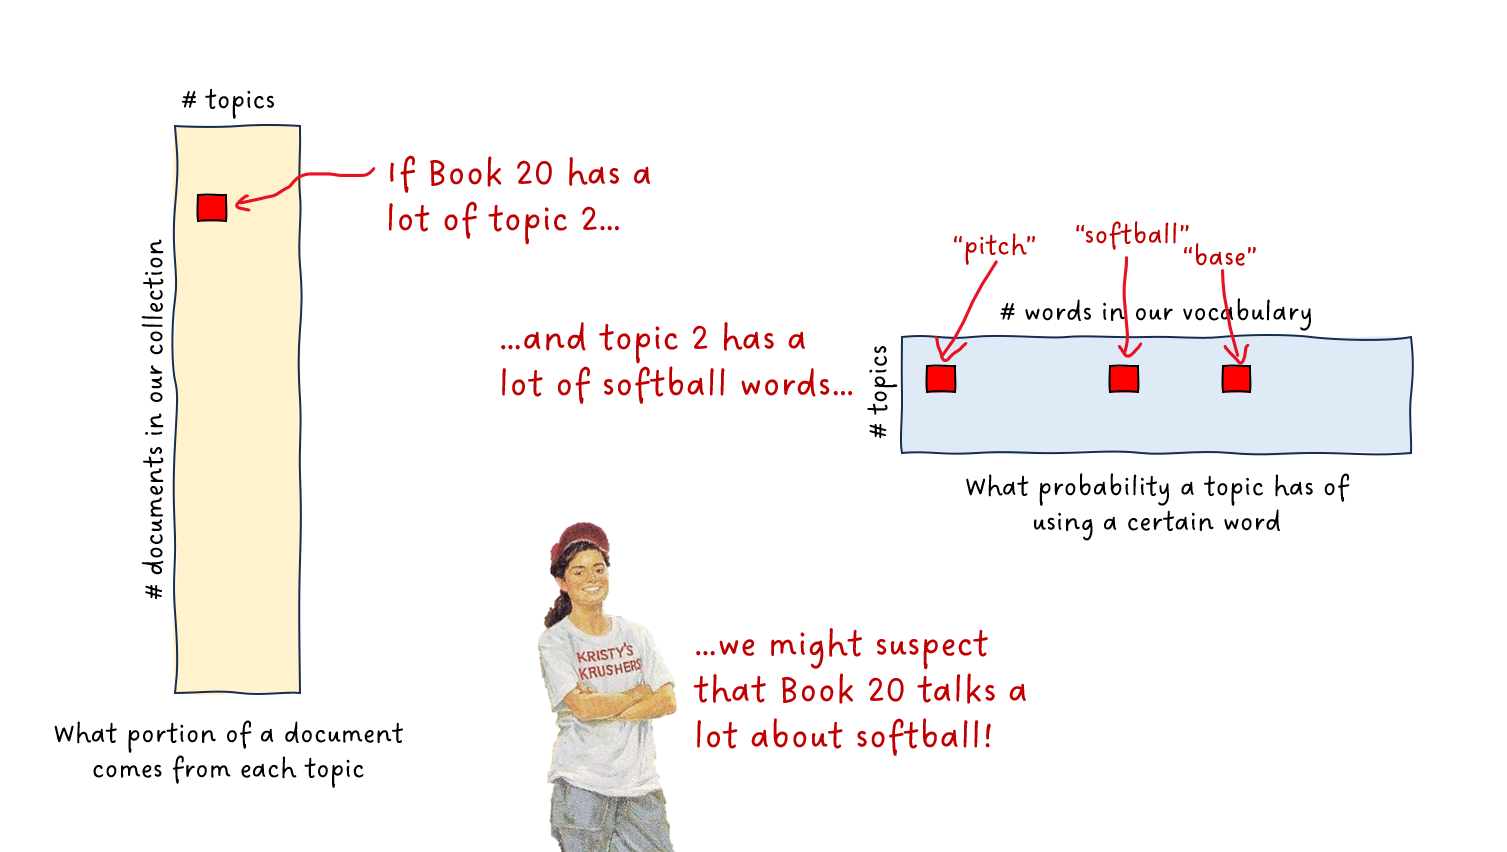 Illustration of tables: when making sense of this model, we can imagine looking into the table for a paragraph in Kristy and the Walking Disaster - if we see a lot of Topic 2 in that paragraph, and Topic 2 has a high probability of softball words like "pitch", "softball", and "base", then we might be able to guess the paragraph talks about softball.